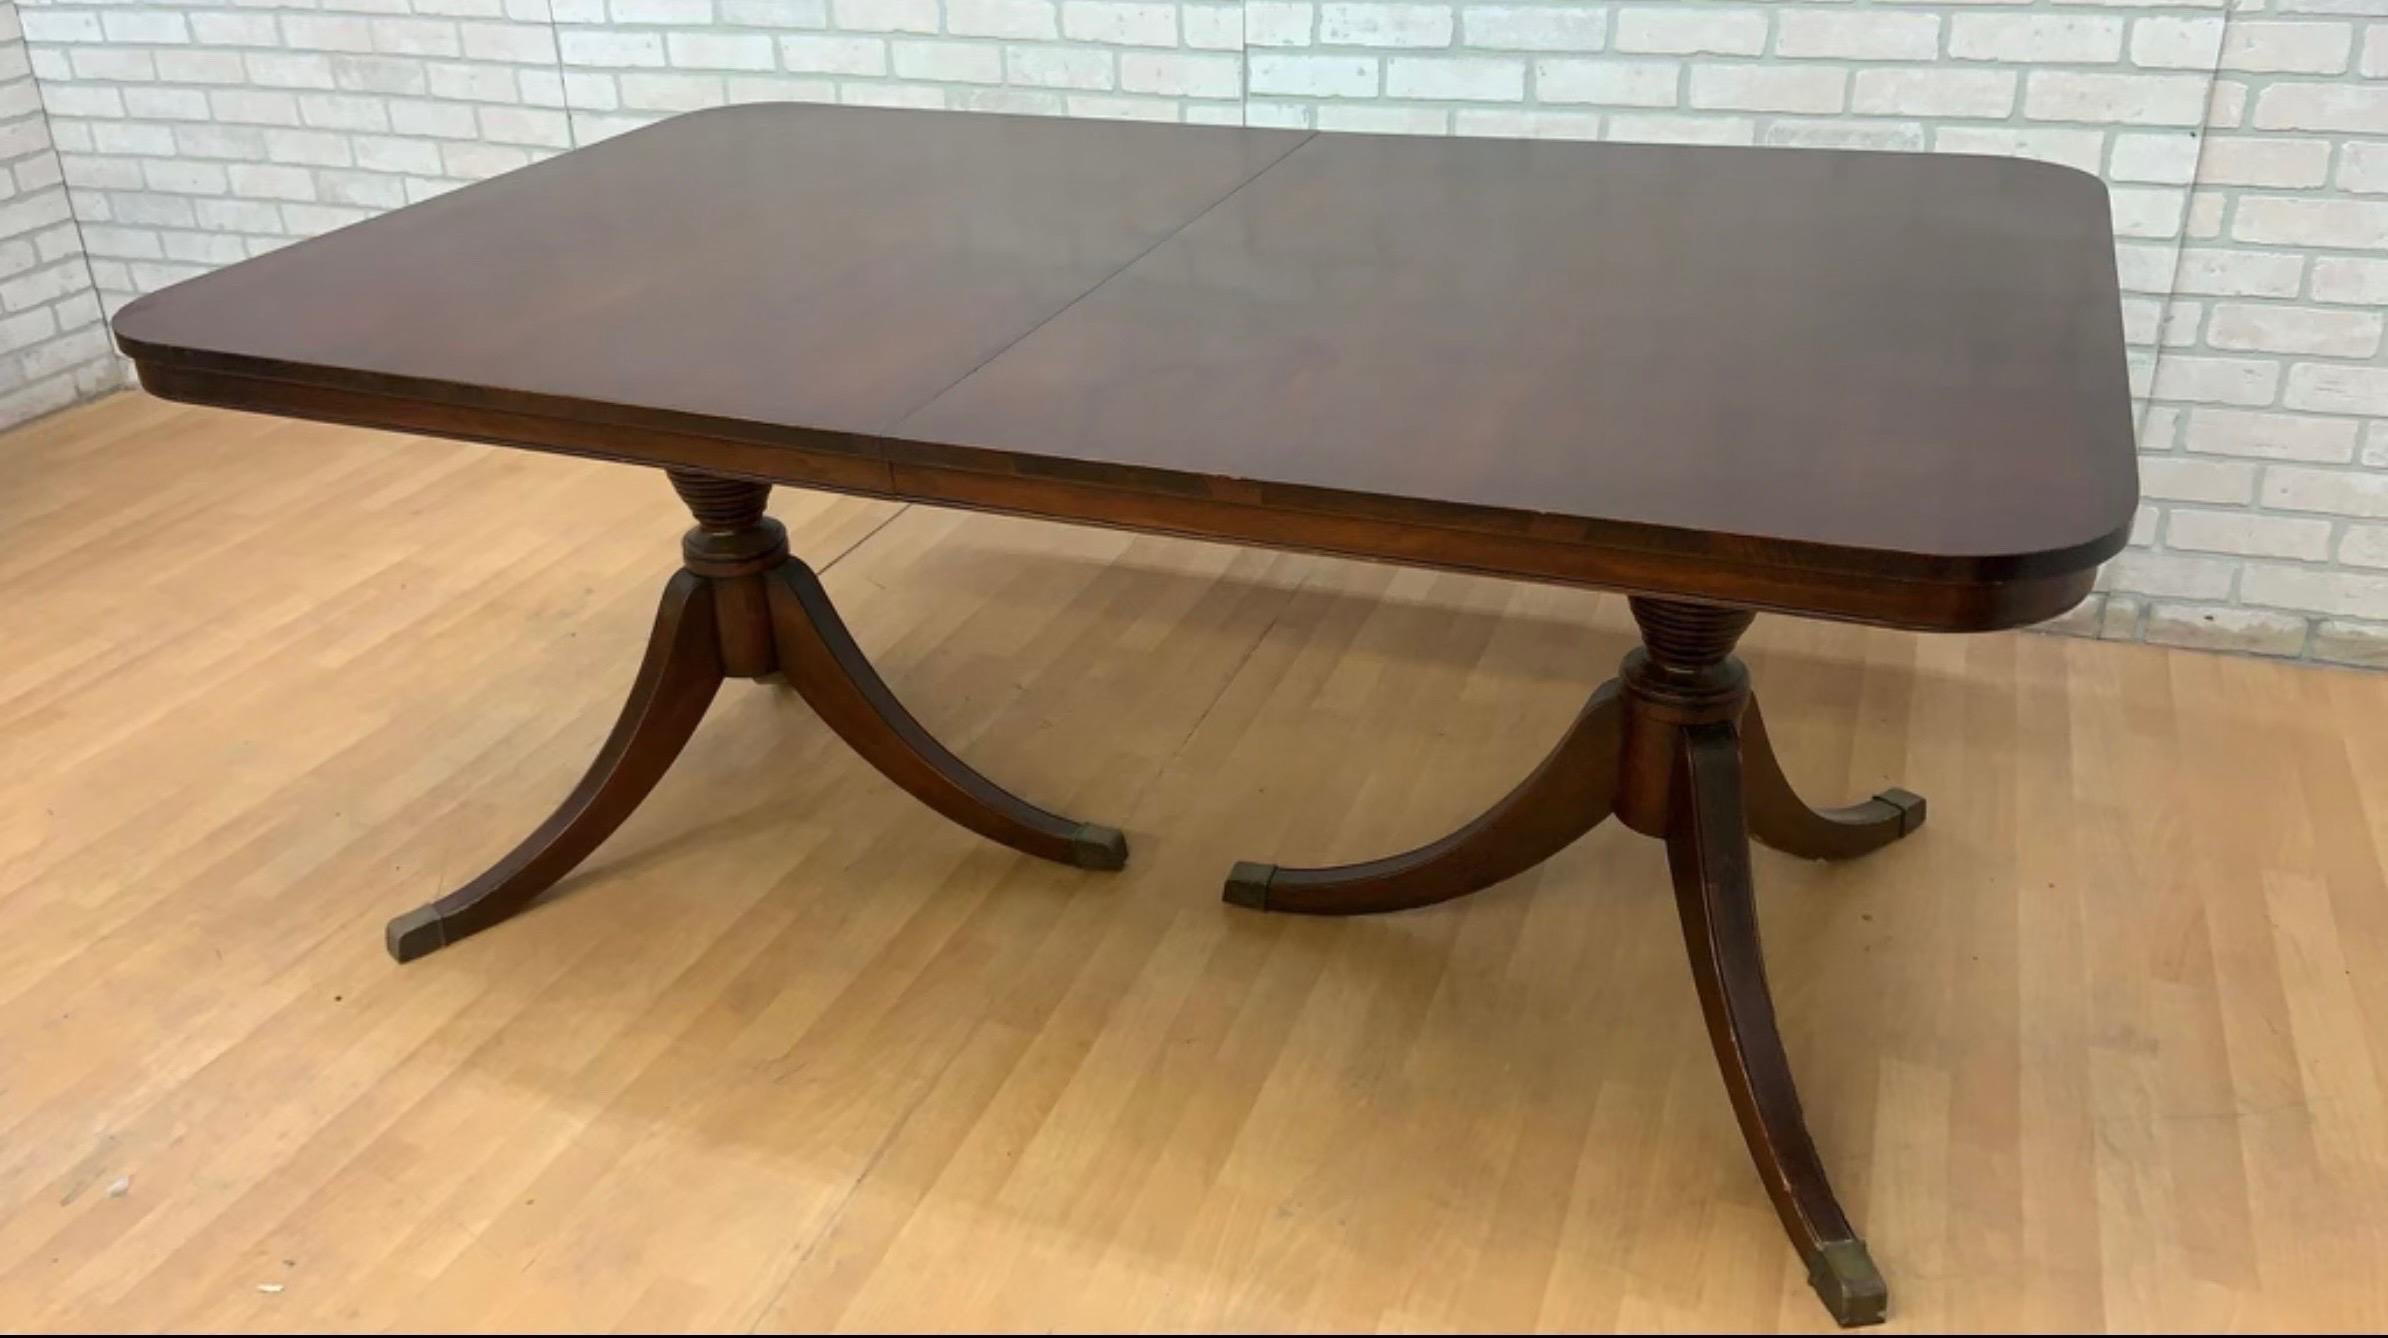 Antique Regency Duncan Phyfe Style Mahogany Dining Table w/ 3 Leaves For Sale